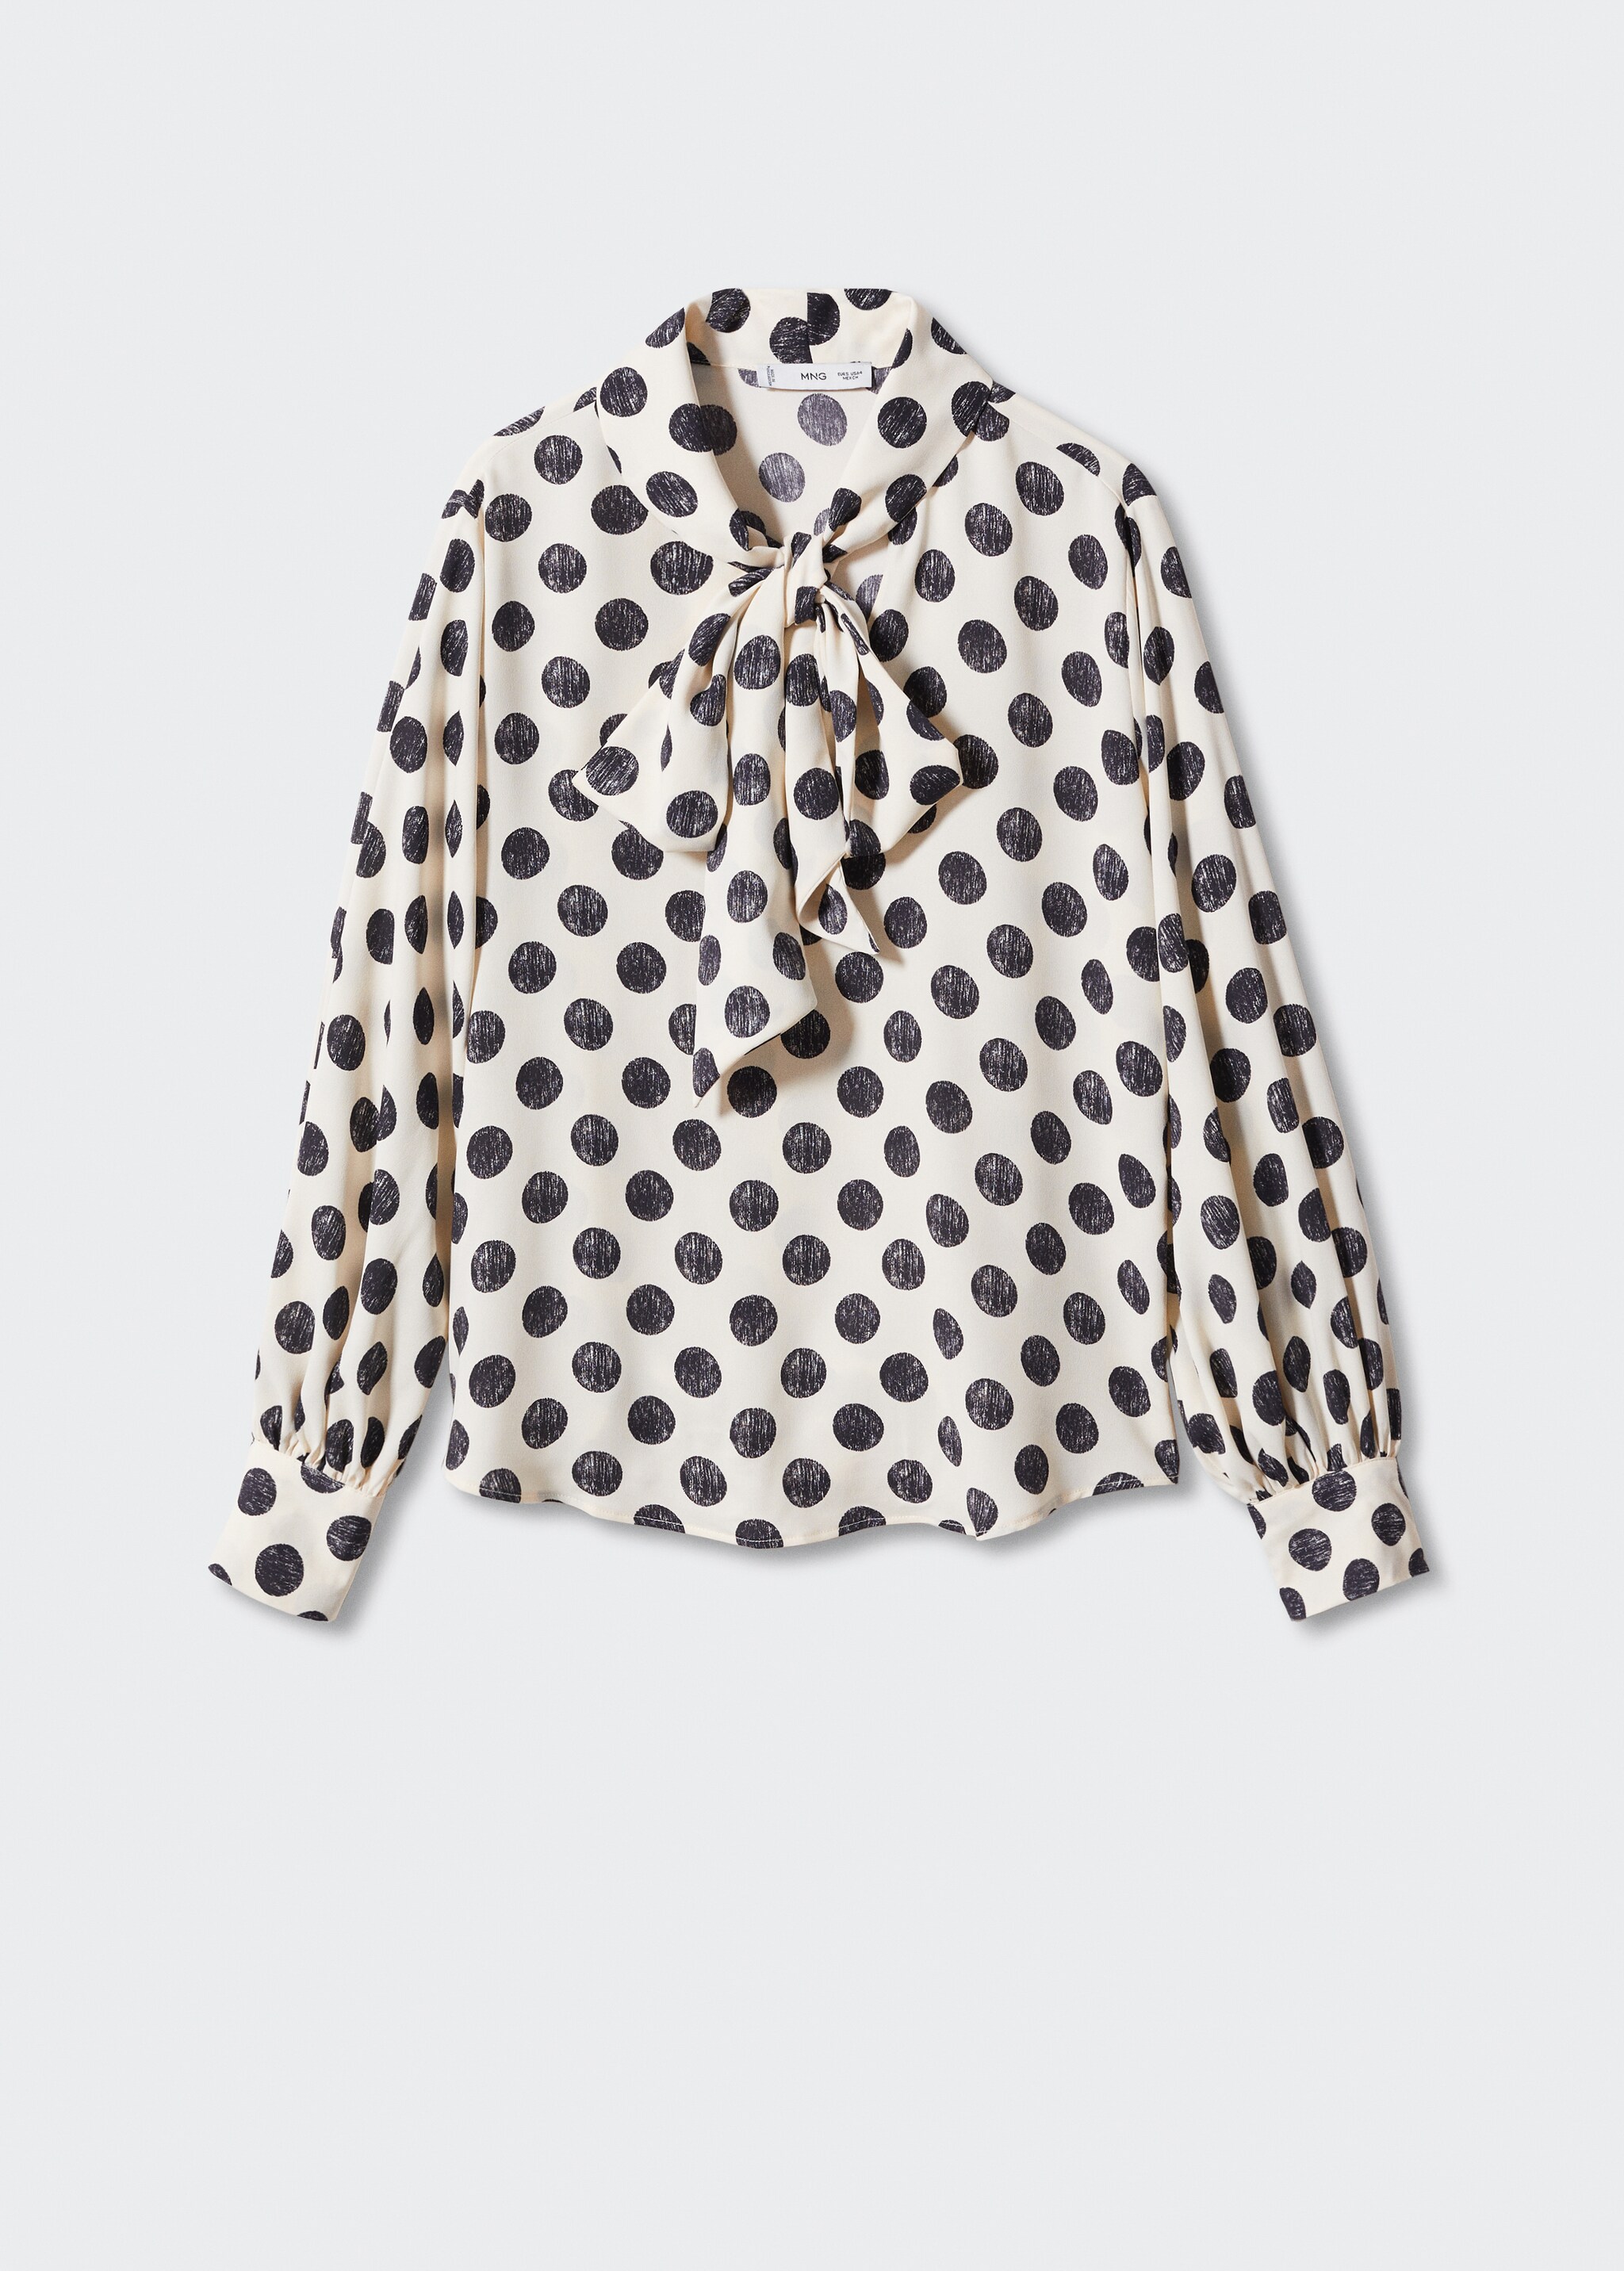 Bow polka-dot blouse - Article without model